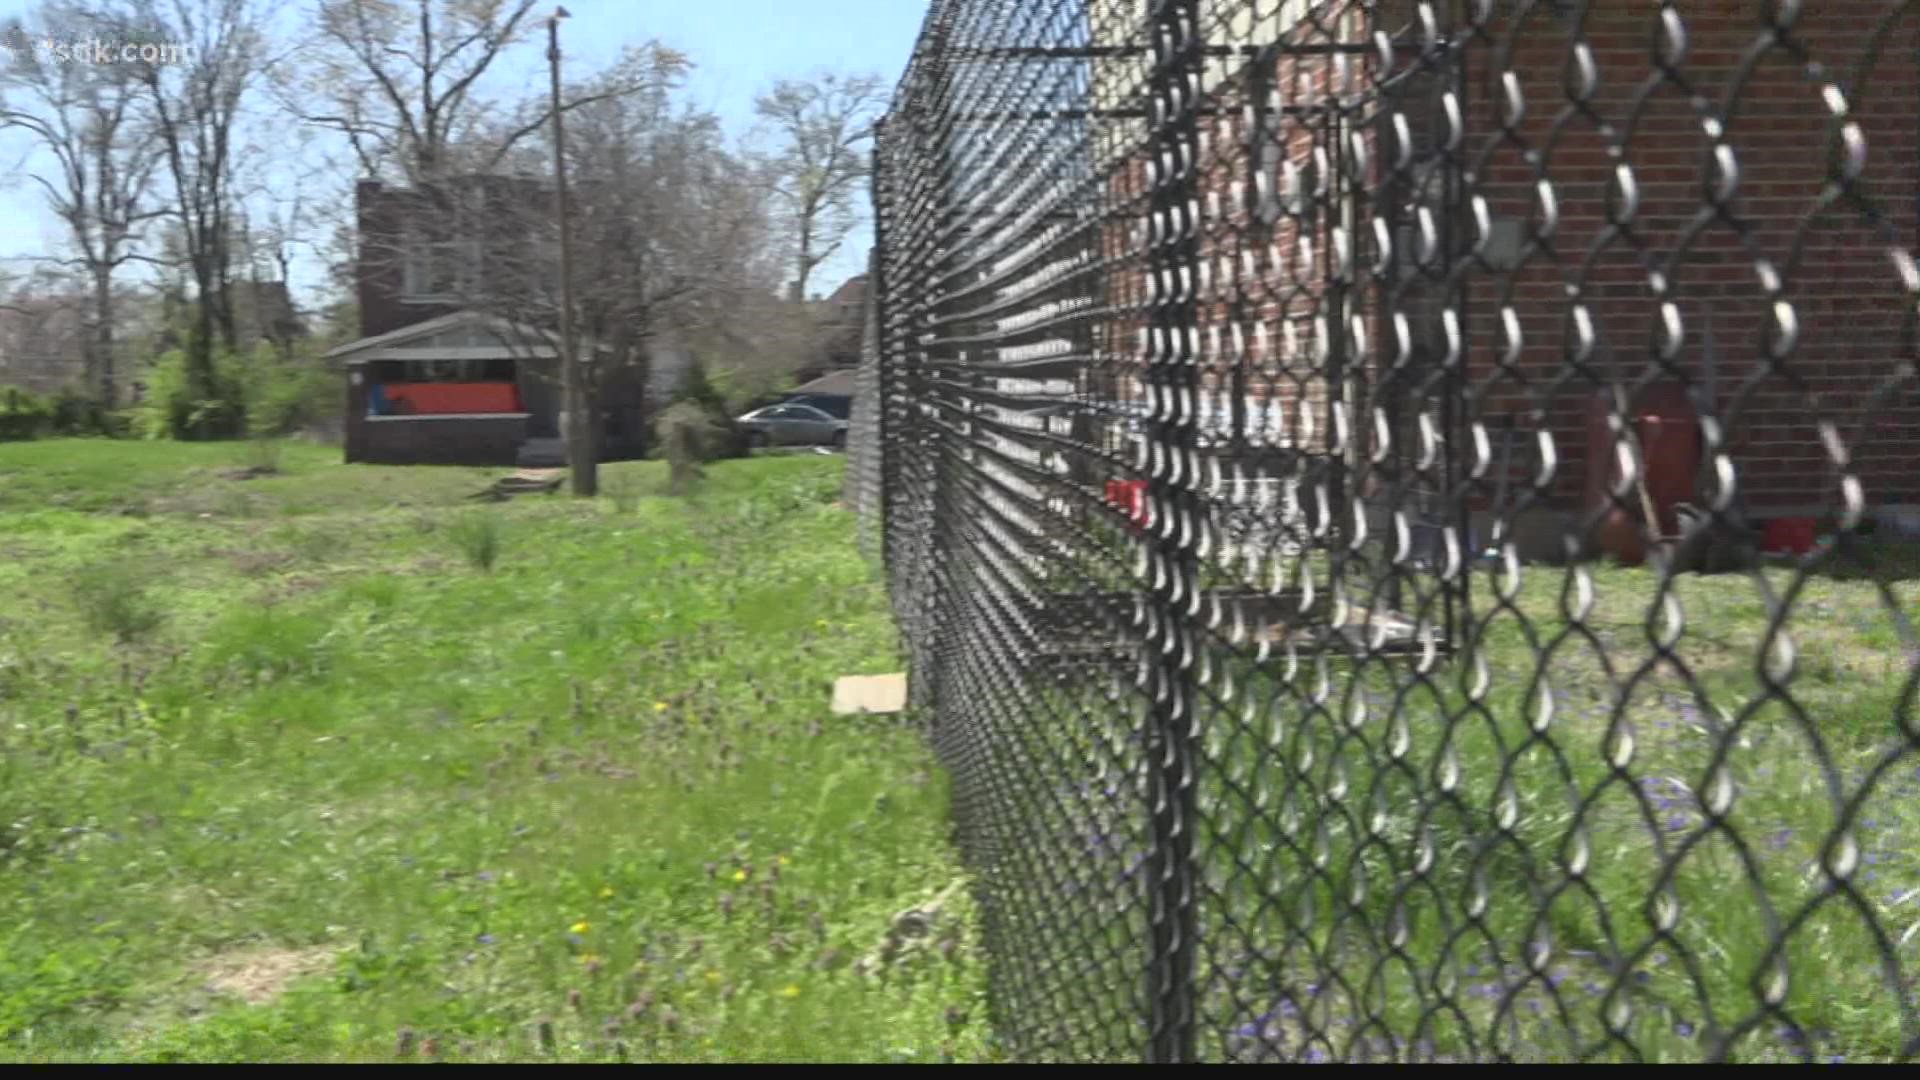 A north St. Louis woman claims workers from the City of St. Louis tore down her fence while clearing a nearby lot, and then refused to pay for it.